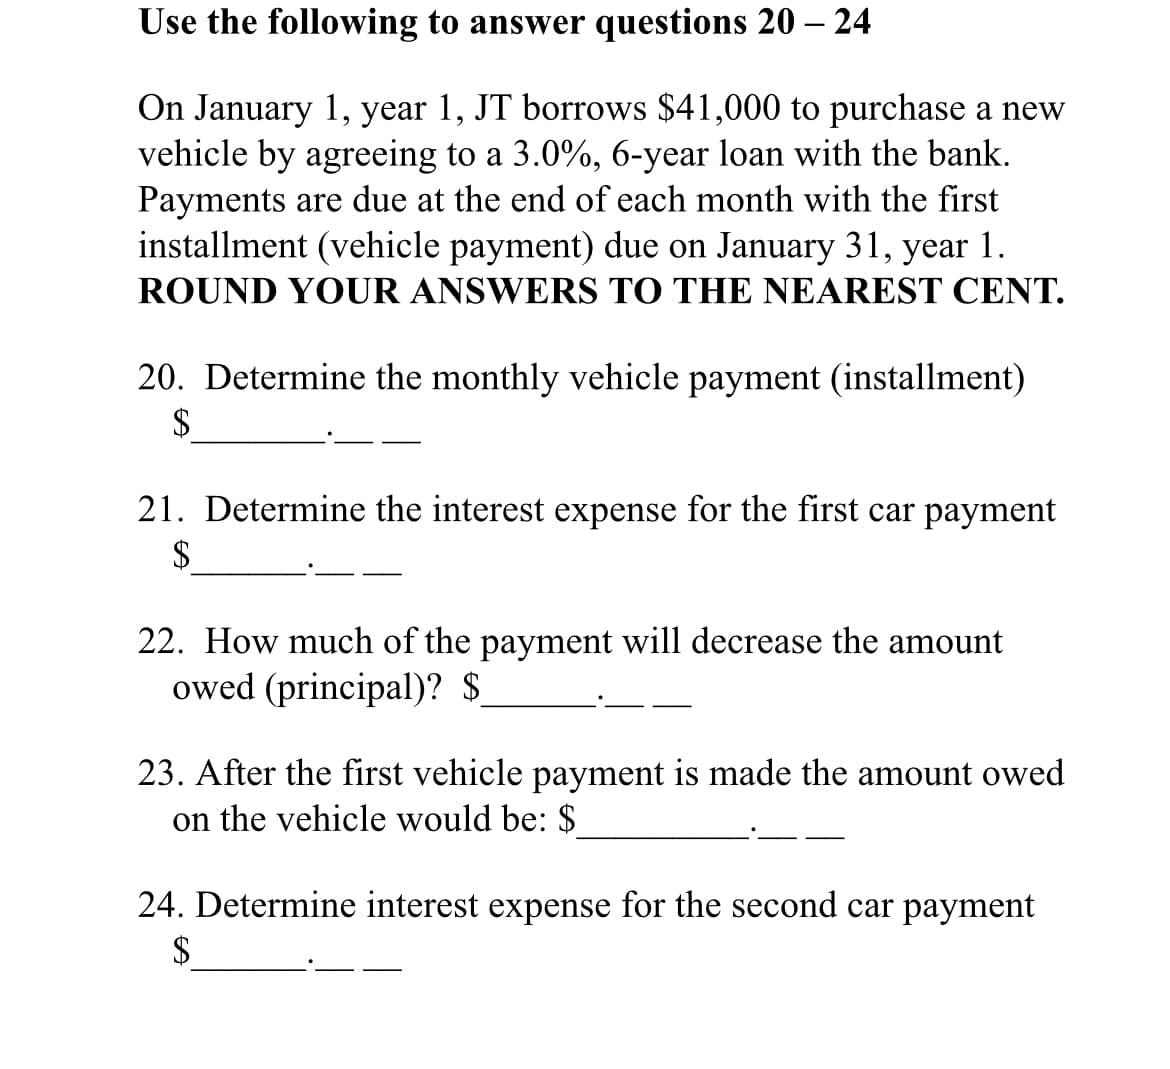 Use the following to answer questions 20 – 24
On January 1, year 1, JT borrows $41,000 to purchase a new
vehicle by agreeing to a 3.0%, 6-year loan with the bank.
Payments are due at the end of each month with the first
installment (vehicle payment) due on January 31, year 1.
ROUND YOUR ANSWERS TO THE NEAREST CENT.
20. Determine the monthly vehicle payment (installment)
$
21. Determine the interest expense for the first car payment
$
22. How much of the payment will decrease the amount
owed (principal)? $
23. After the first vehicle payment is made the amount owed
on the vehicle would be: $
24. Determine interest expense for the second car payment
$
